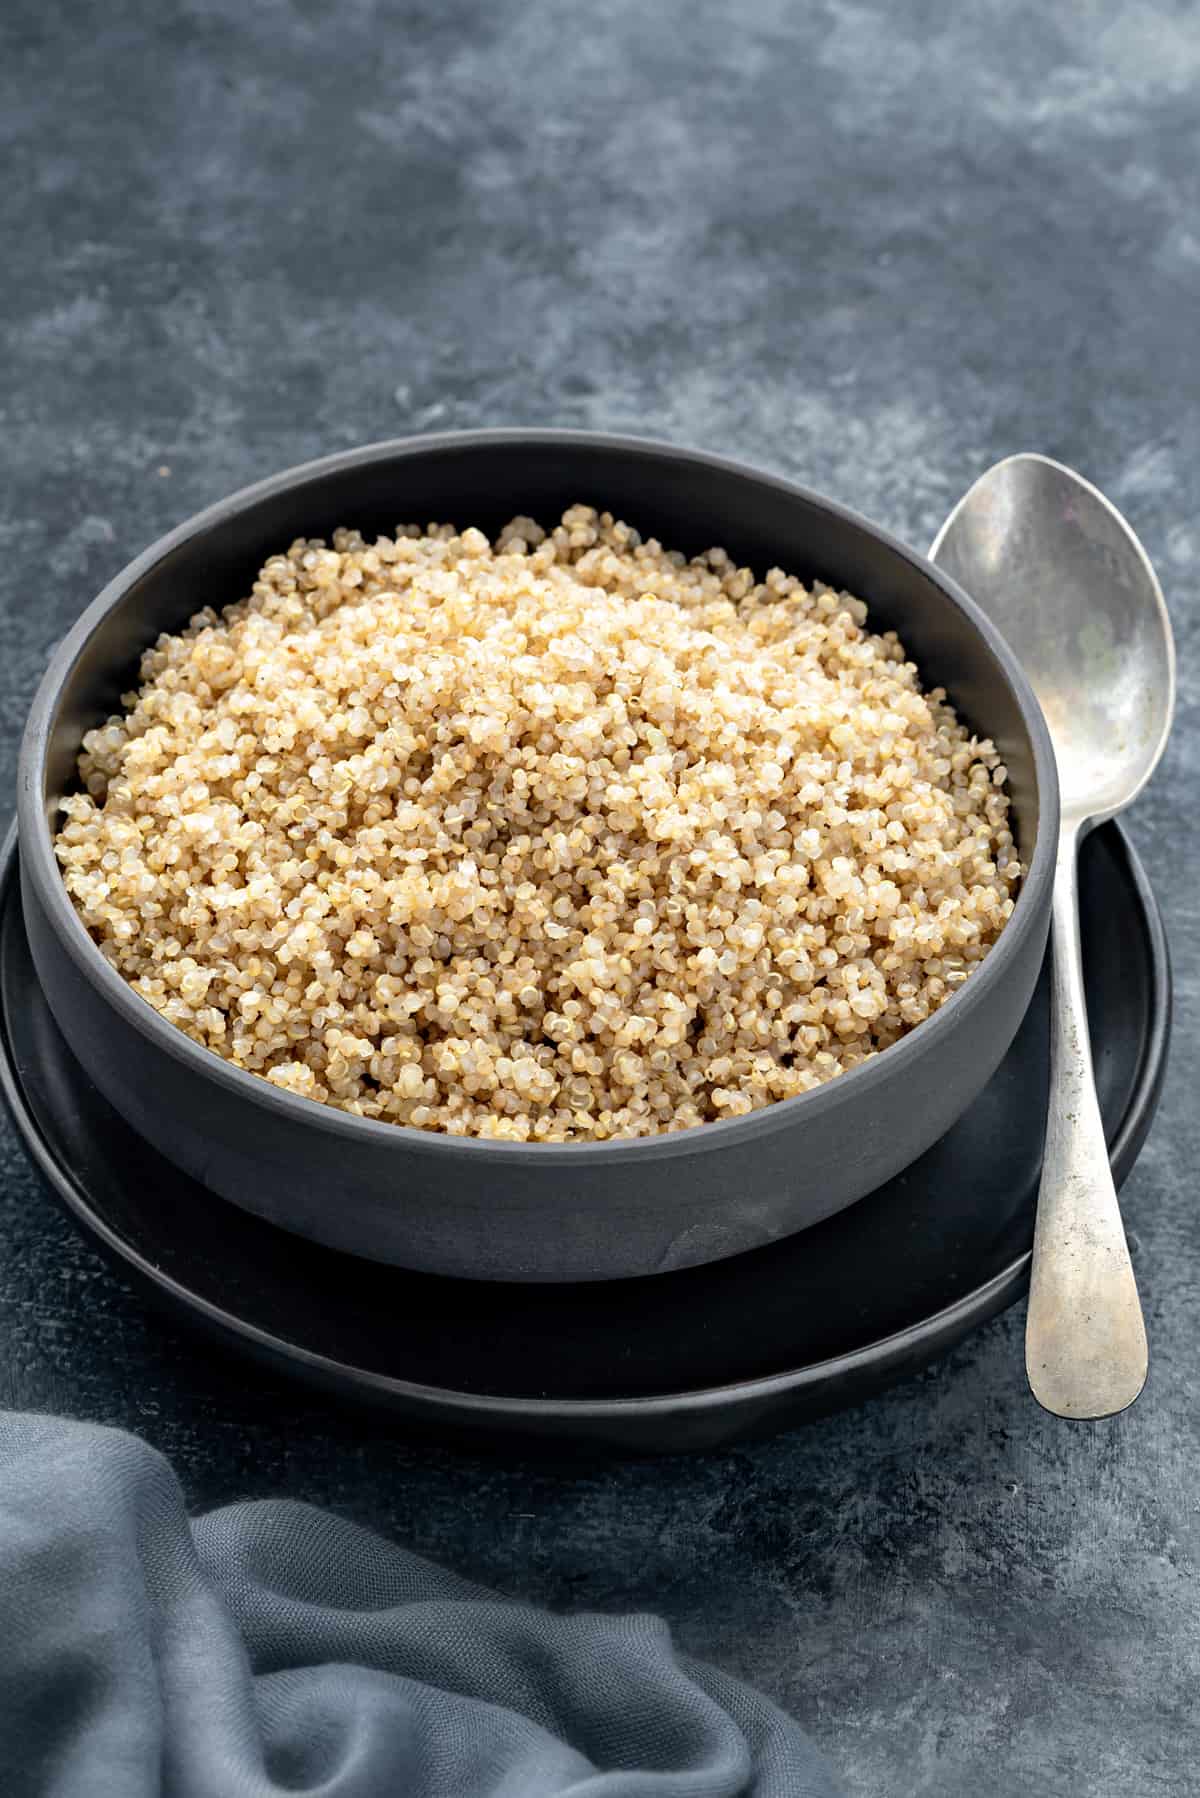 Cooked quinoa served in black bowl with spoon, grey linen on side.